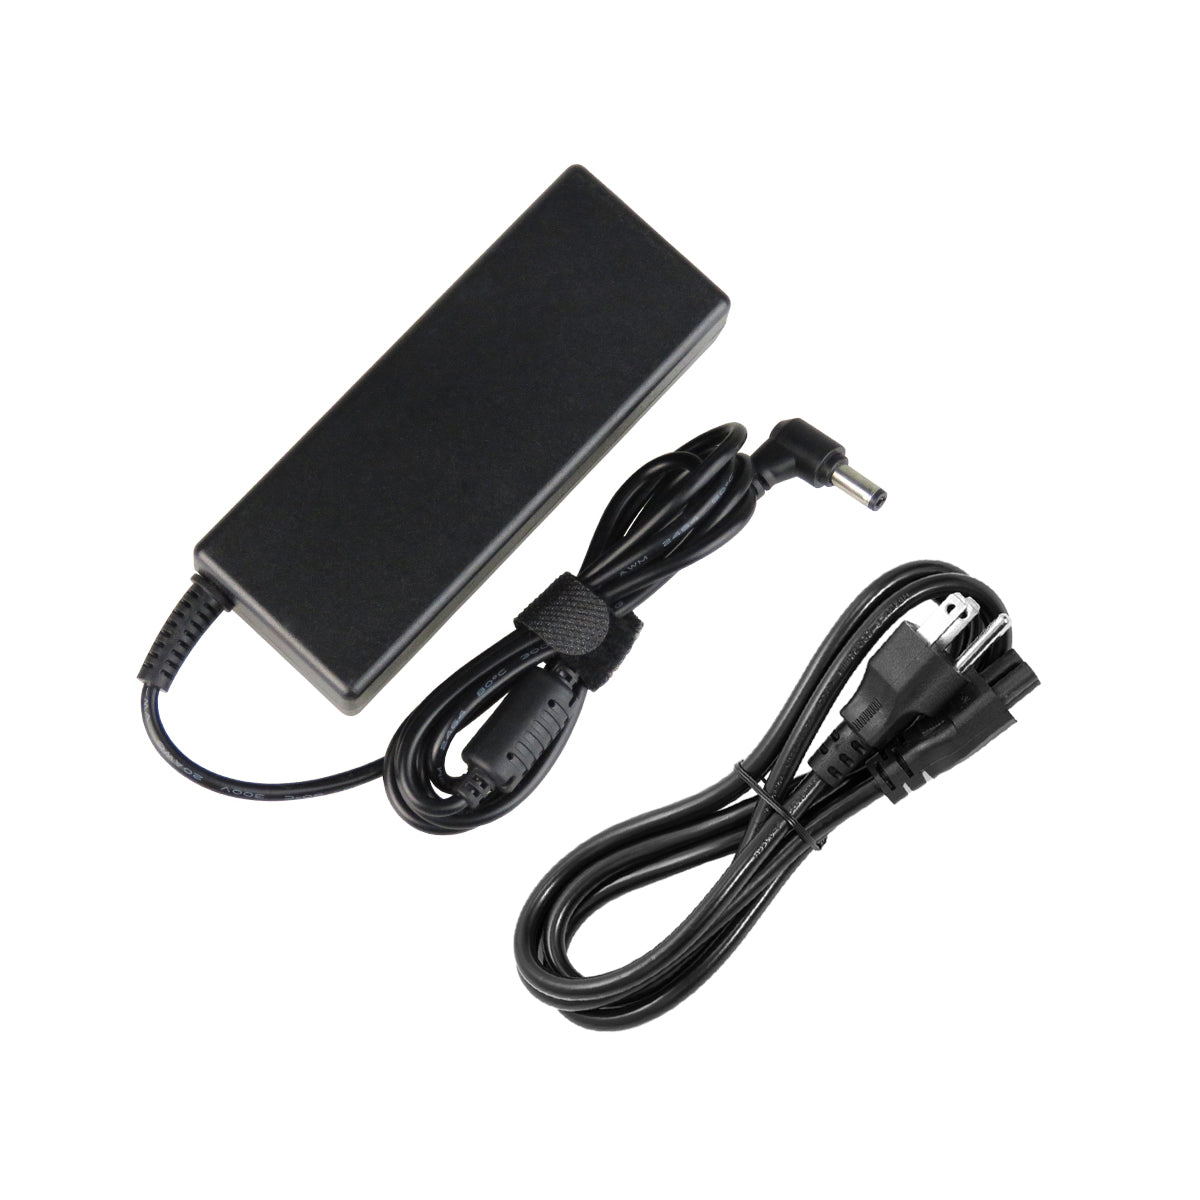 AC Adapter Charger for ASUS N52 Notebook.